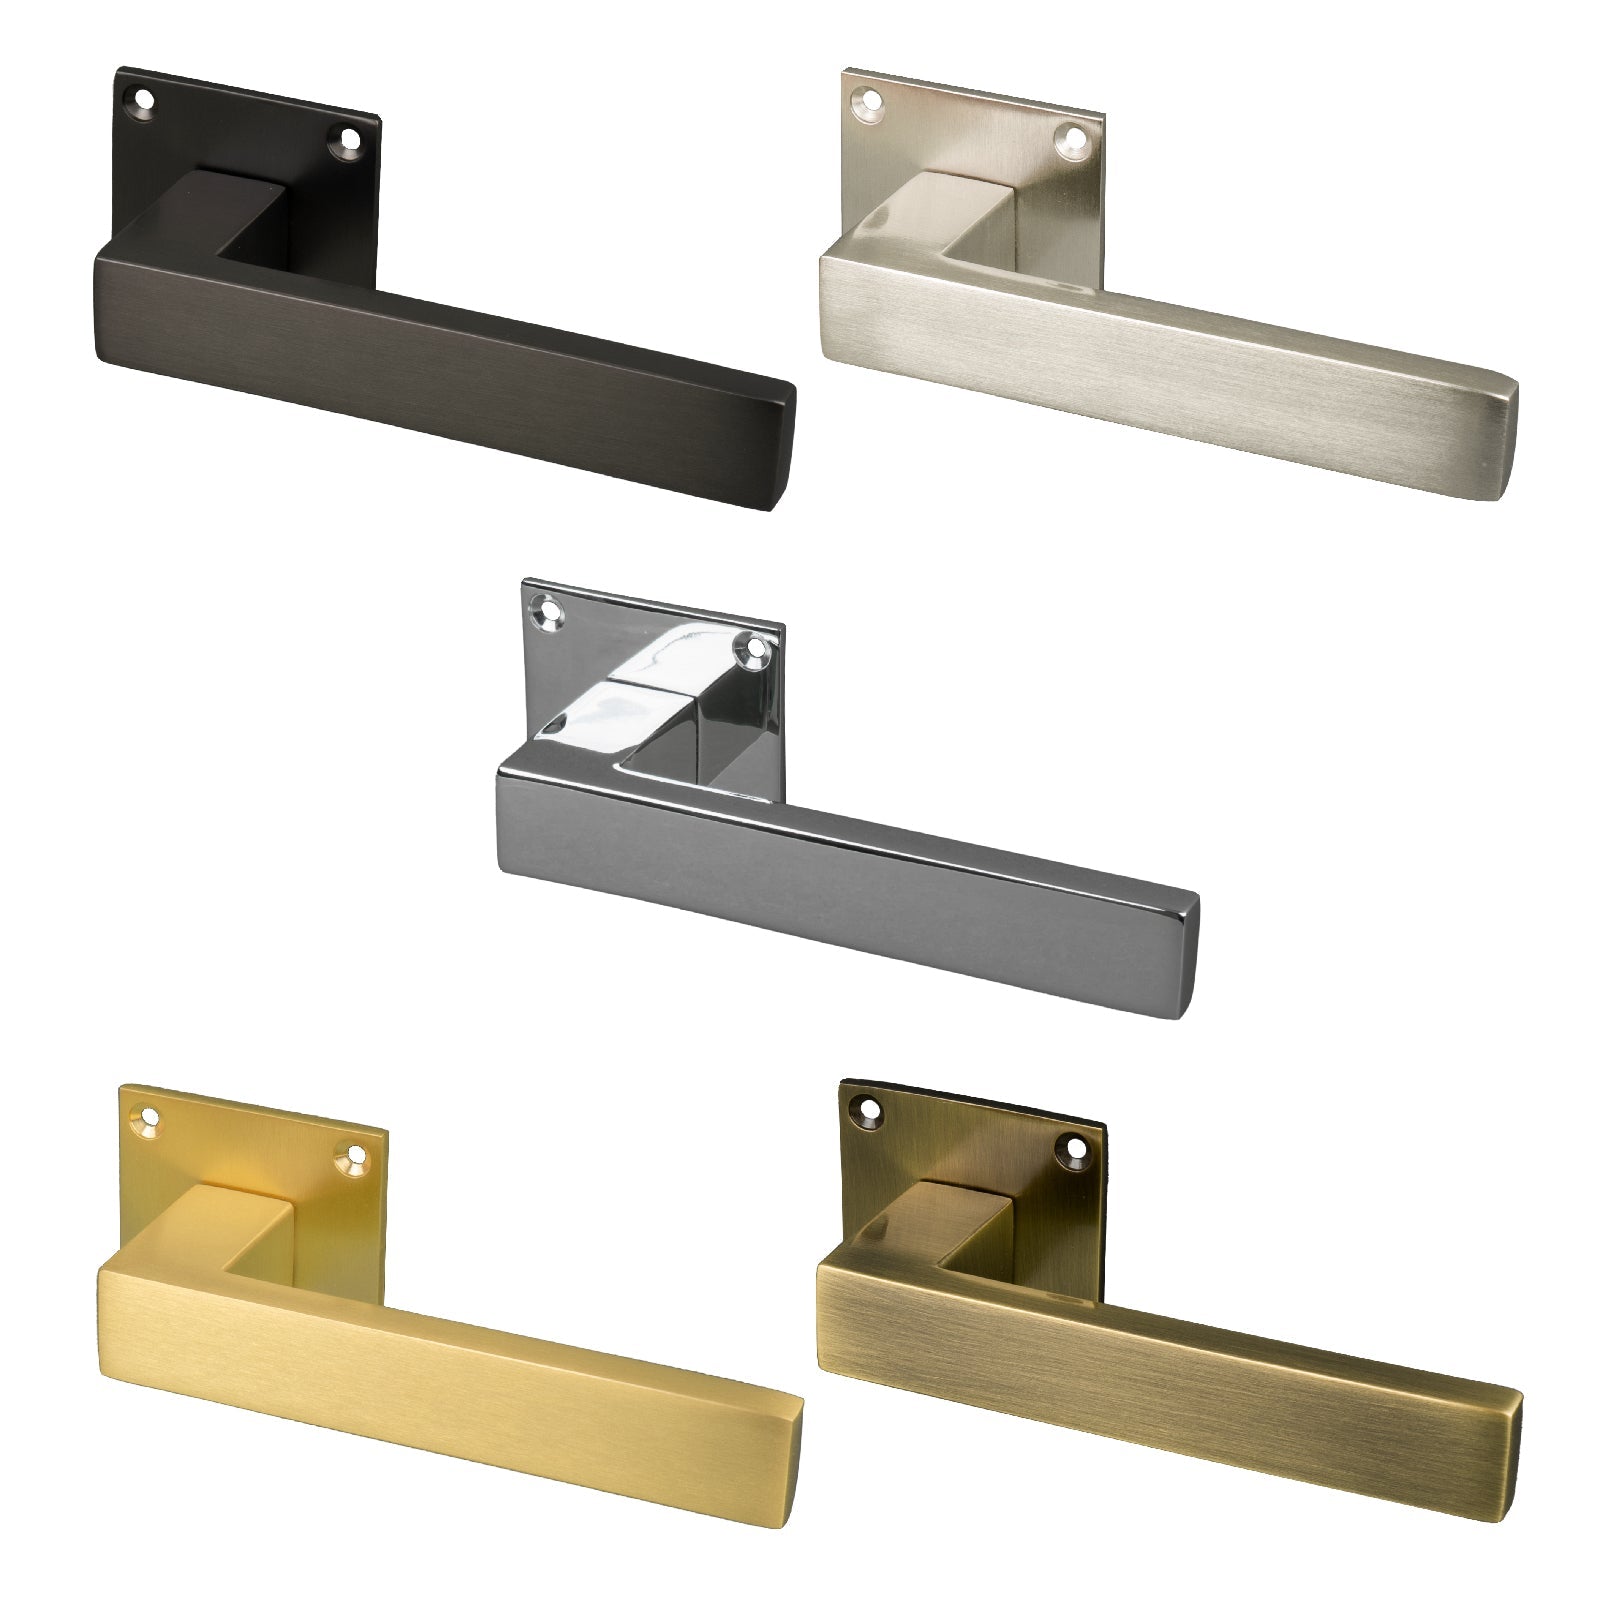 Delta square rose door handles - low profile with screw on plate